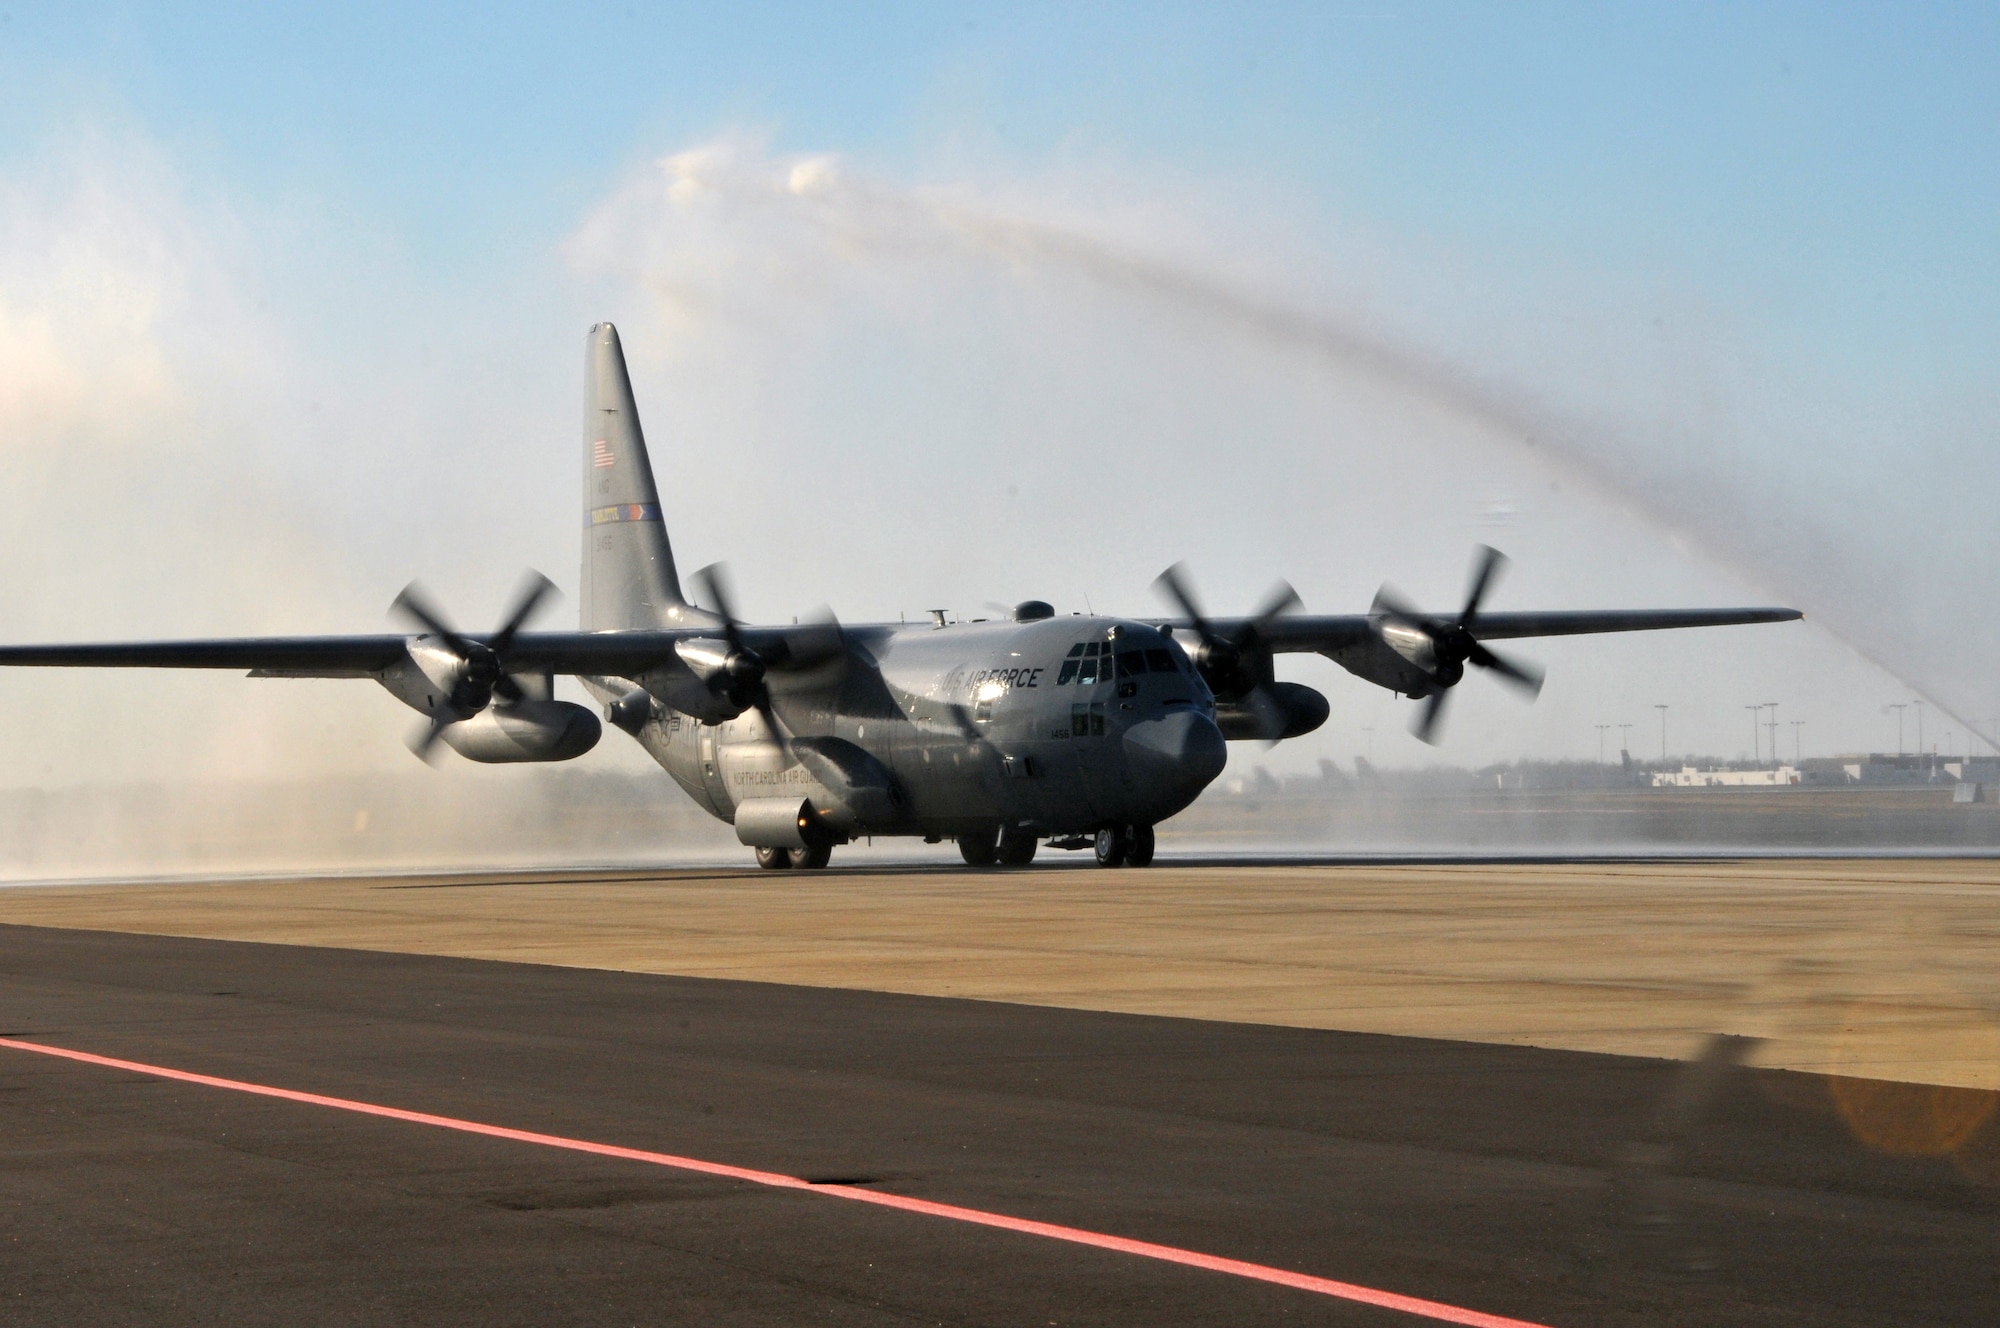 A 145th Airlift Wing C-130 Hercules aircraft made its way beneath an arc of water spraying from two fire trucks as it taxied to its parking spot.  In a tradition nearly as old as military aviation itself, Senior Master Sgt. Philip Smith completed his final “fini” flight at the North Carolina Air National Guard base on January 16, 2014, symbolizing the end of 35 years of honorable military service.  (Air National Guard photo by Master Sgt. Patricia F. Moran, 145th Public Affairs/Released)